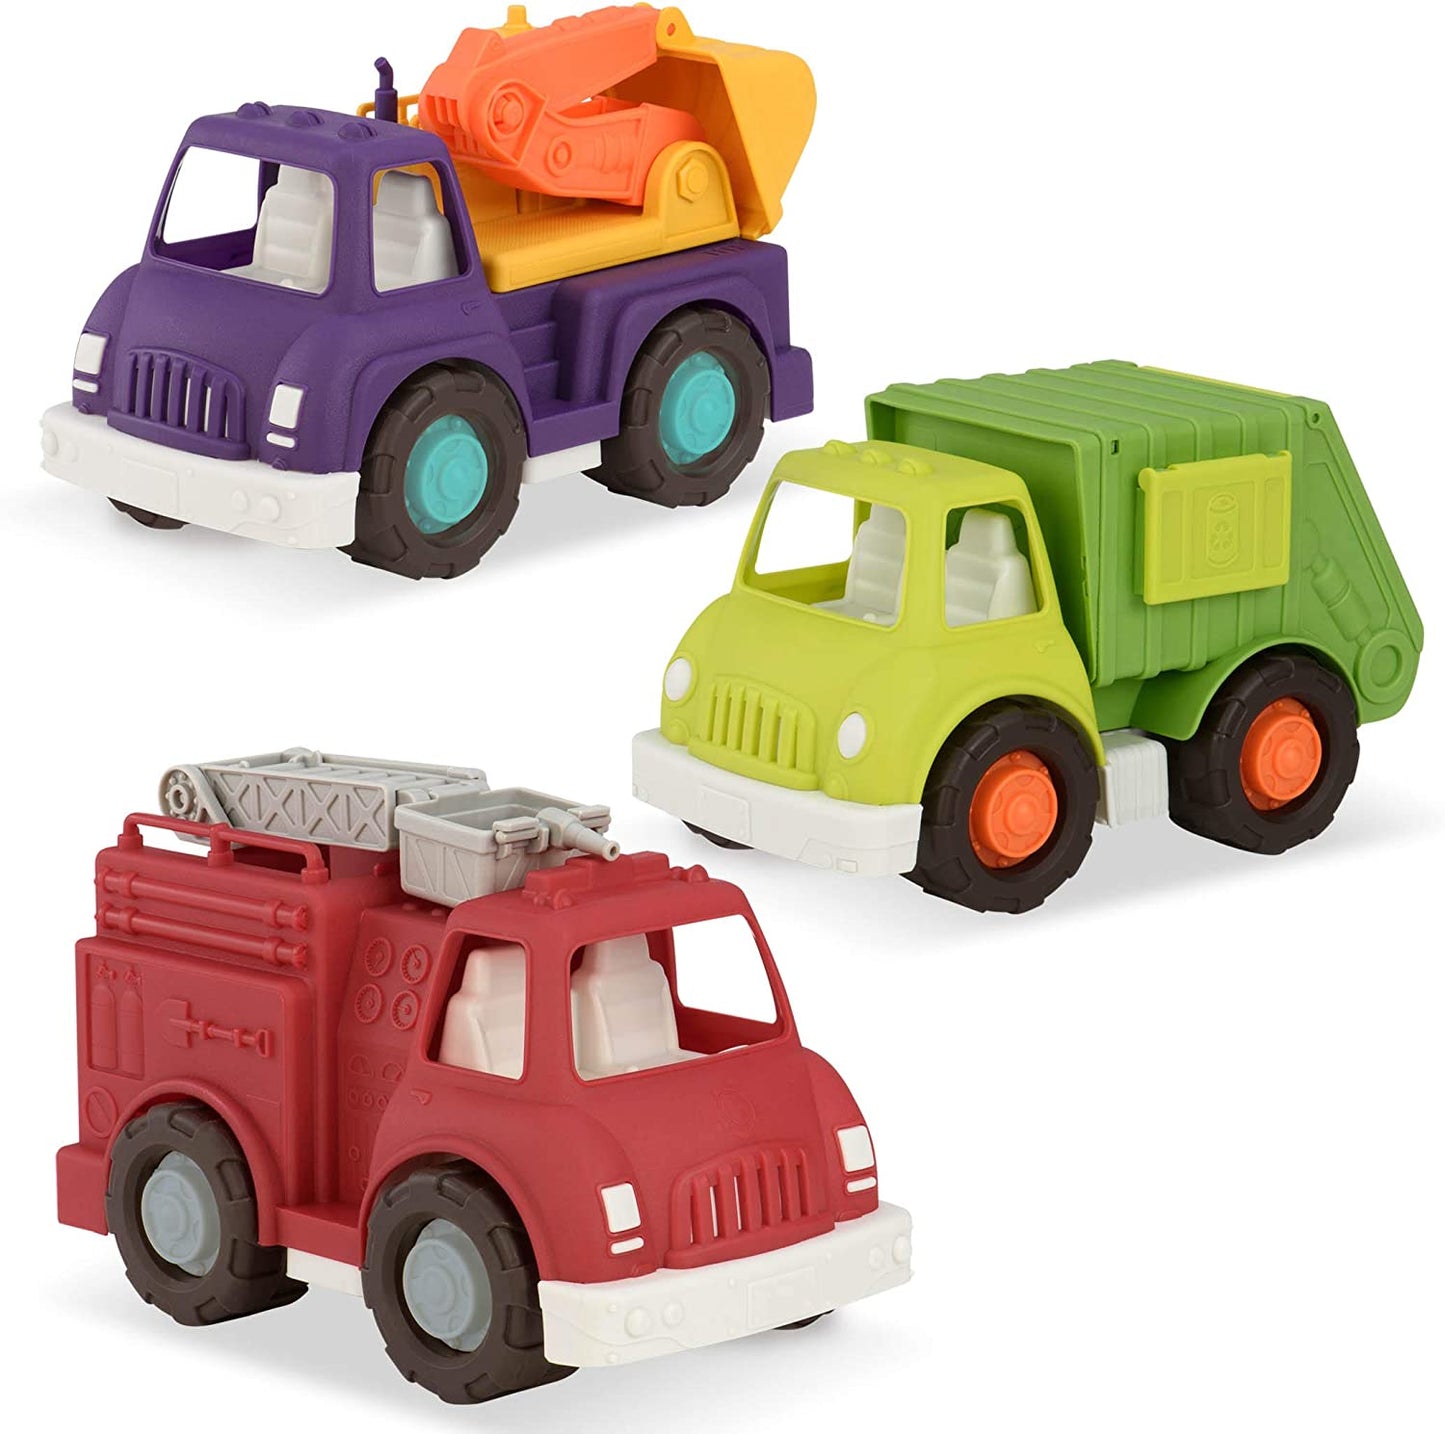 Wonder Wheels by Battat – Fire Truck, Recycling Truck, Excavator Truck – Combo of Recycling, Excavator, & Fire Truck Toys for Toddlers Age 1 & up (3 Pc) – 100% Recyclable